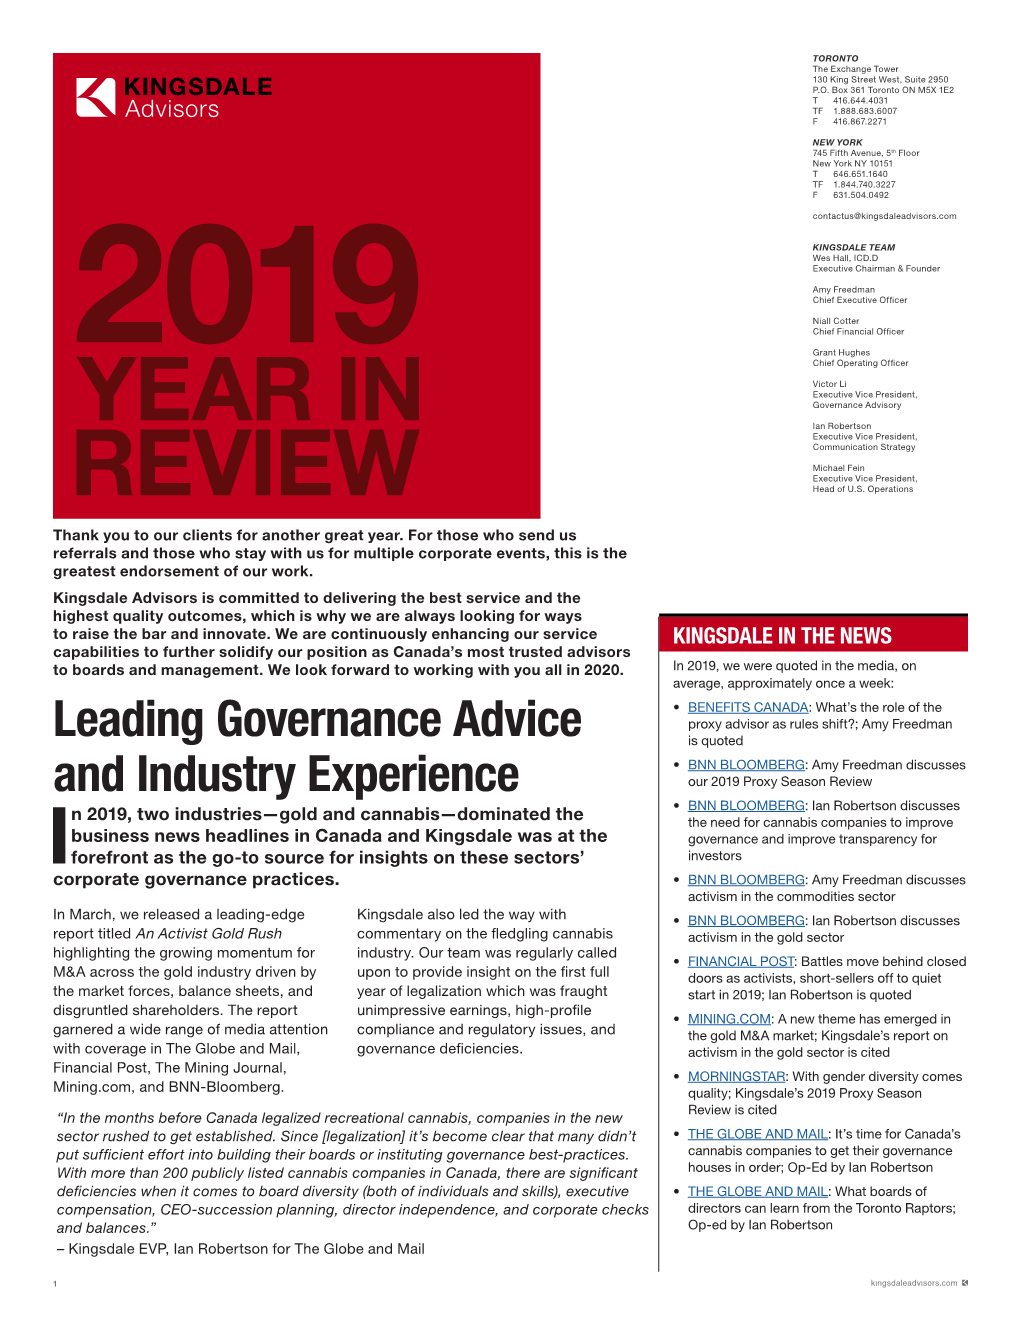 Leading Governance Advice and Industry Experience